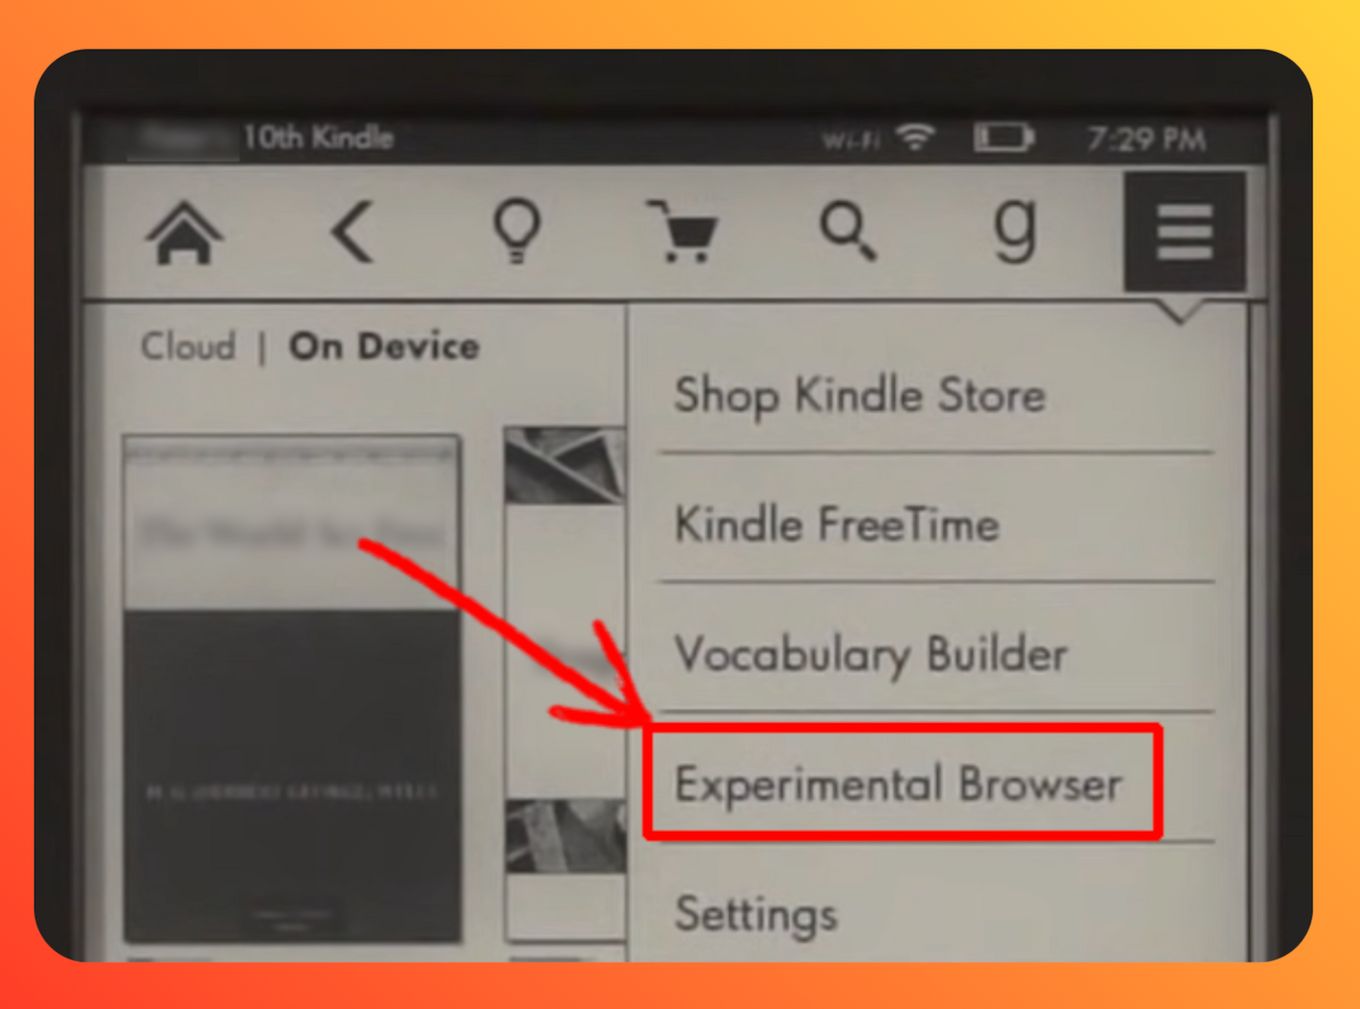 Click on Experimental Browser